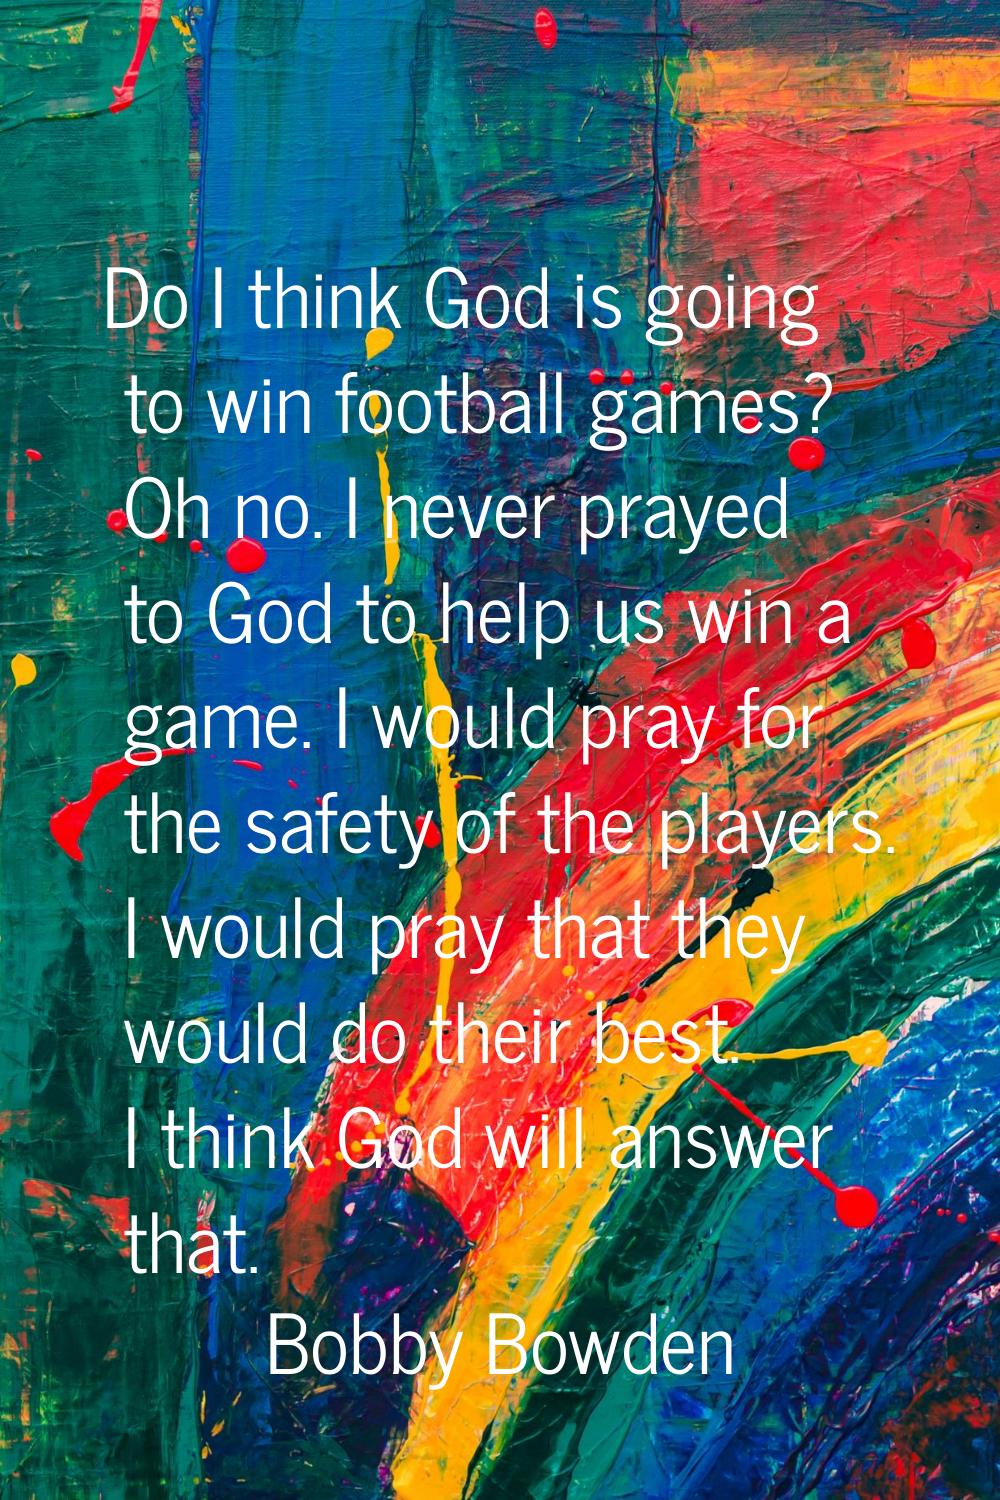 Do I think God is going to win football games? Oh no. I never prayed to God to help us win a game. 